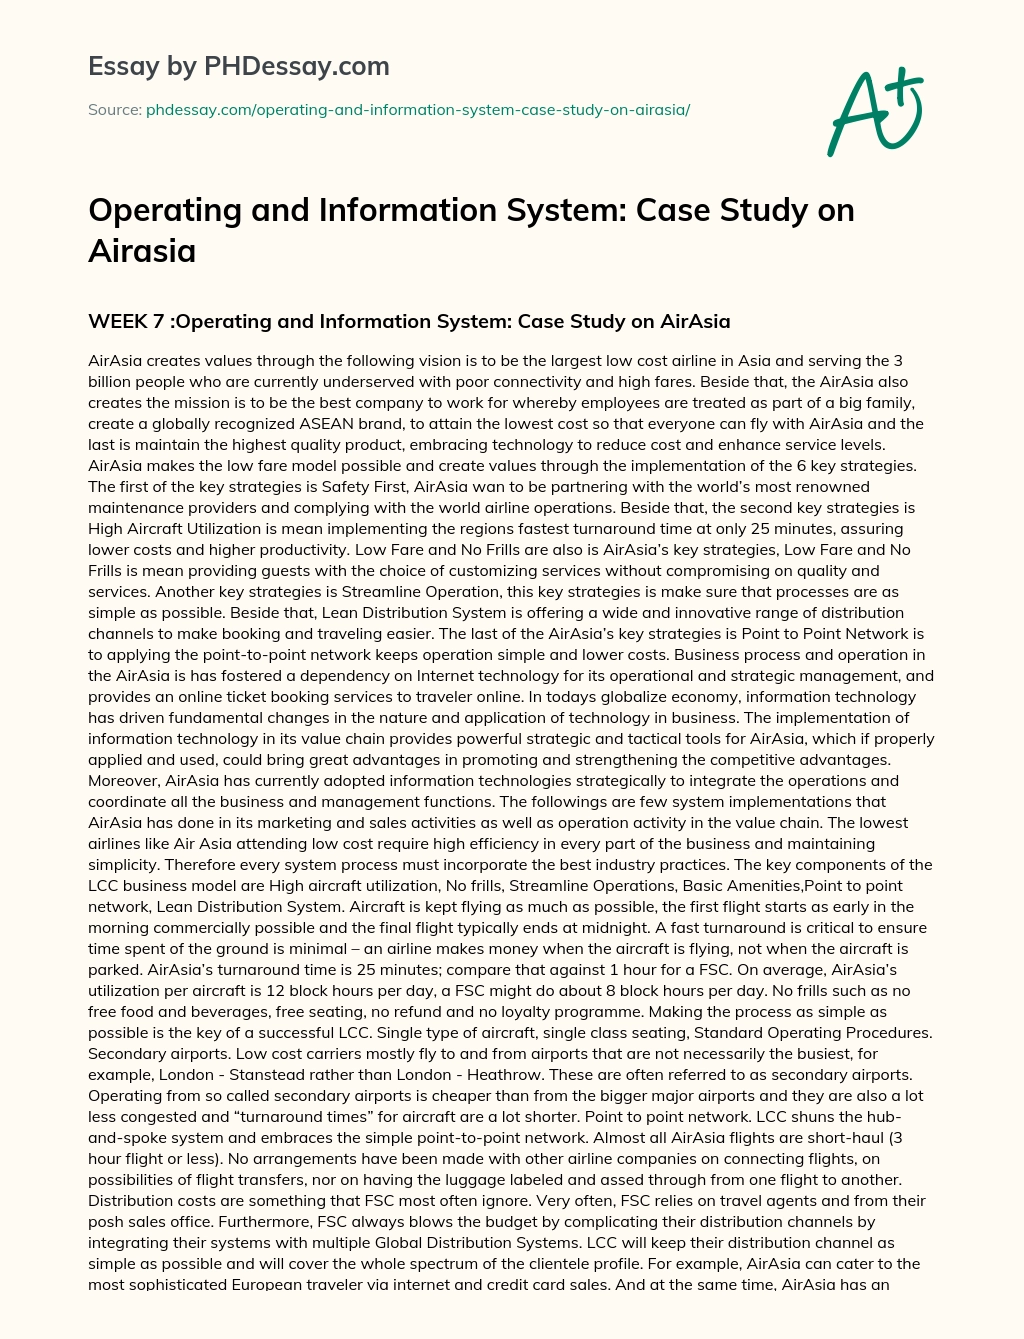 Operating and Information System: Case Study on Airasia essay